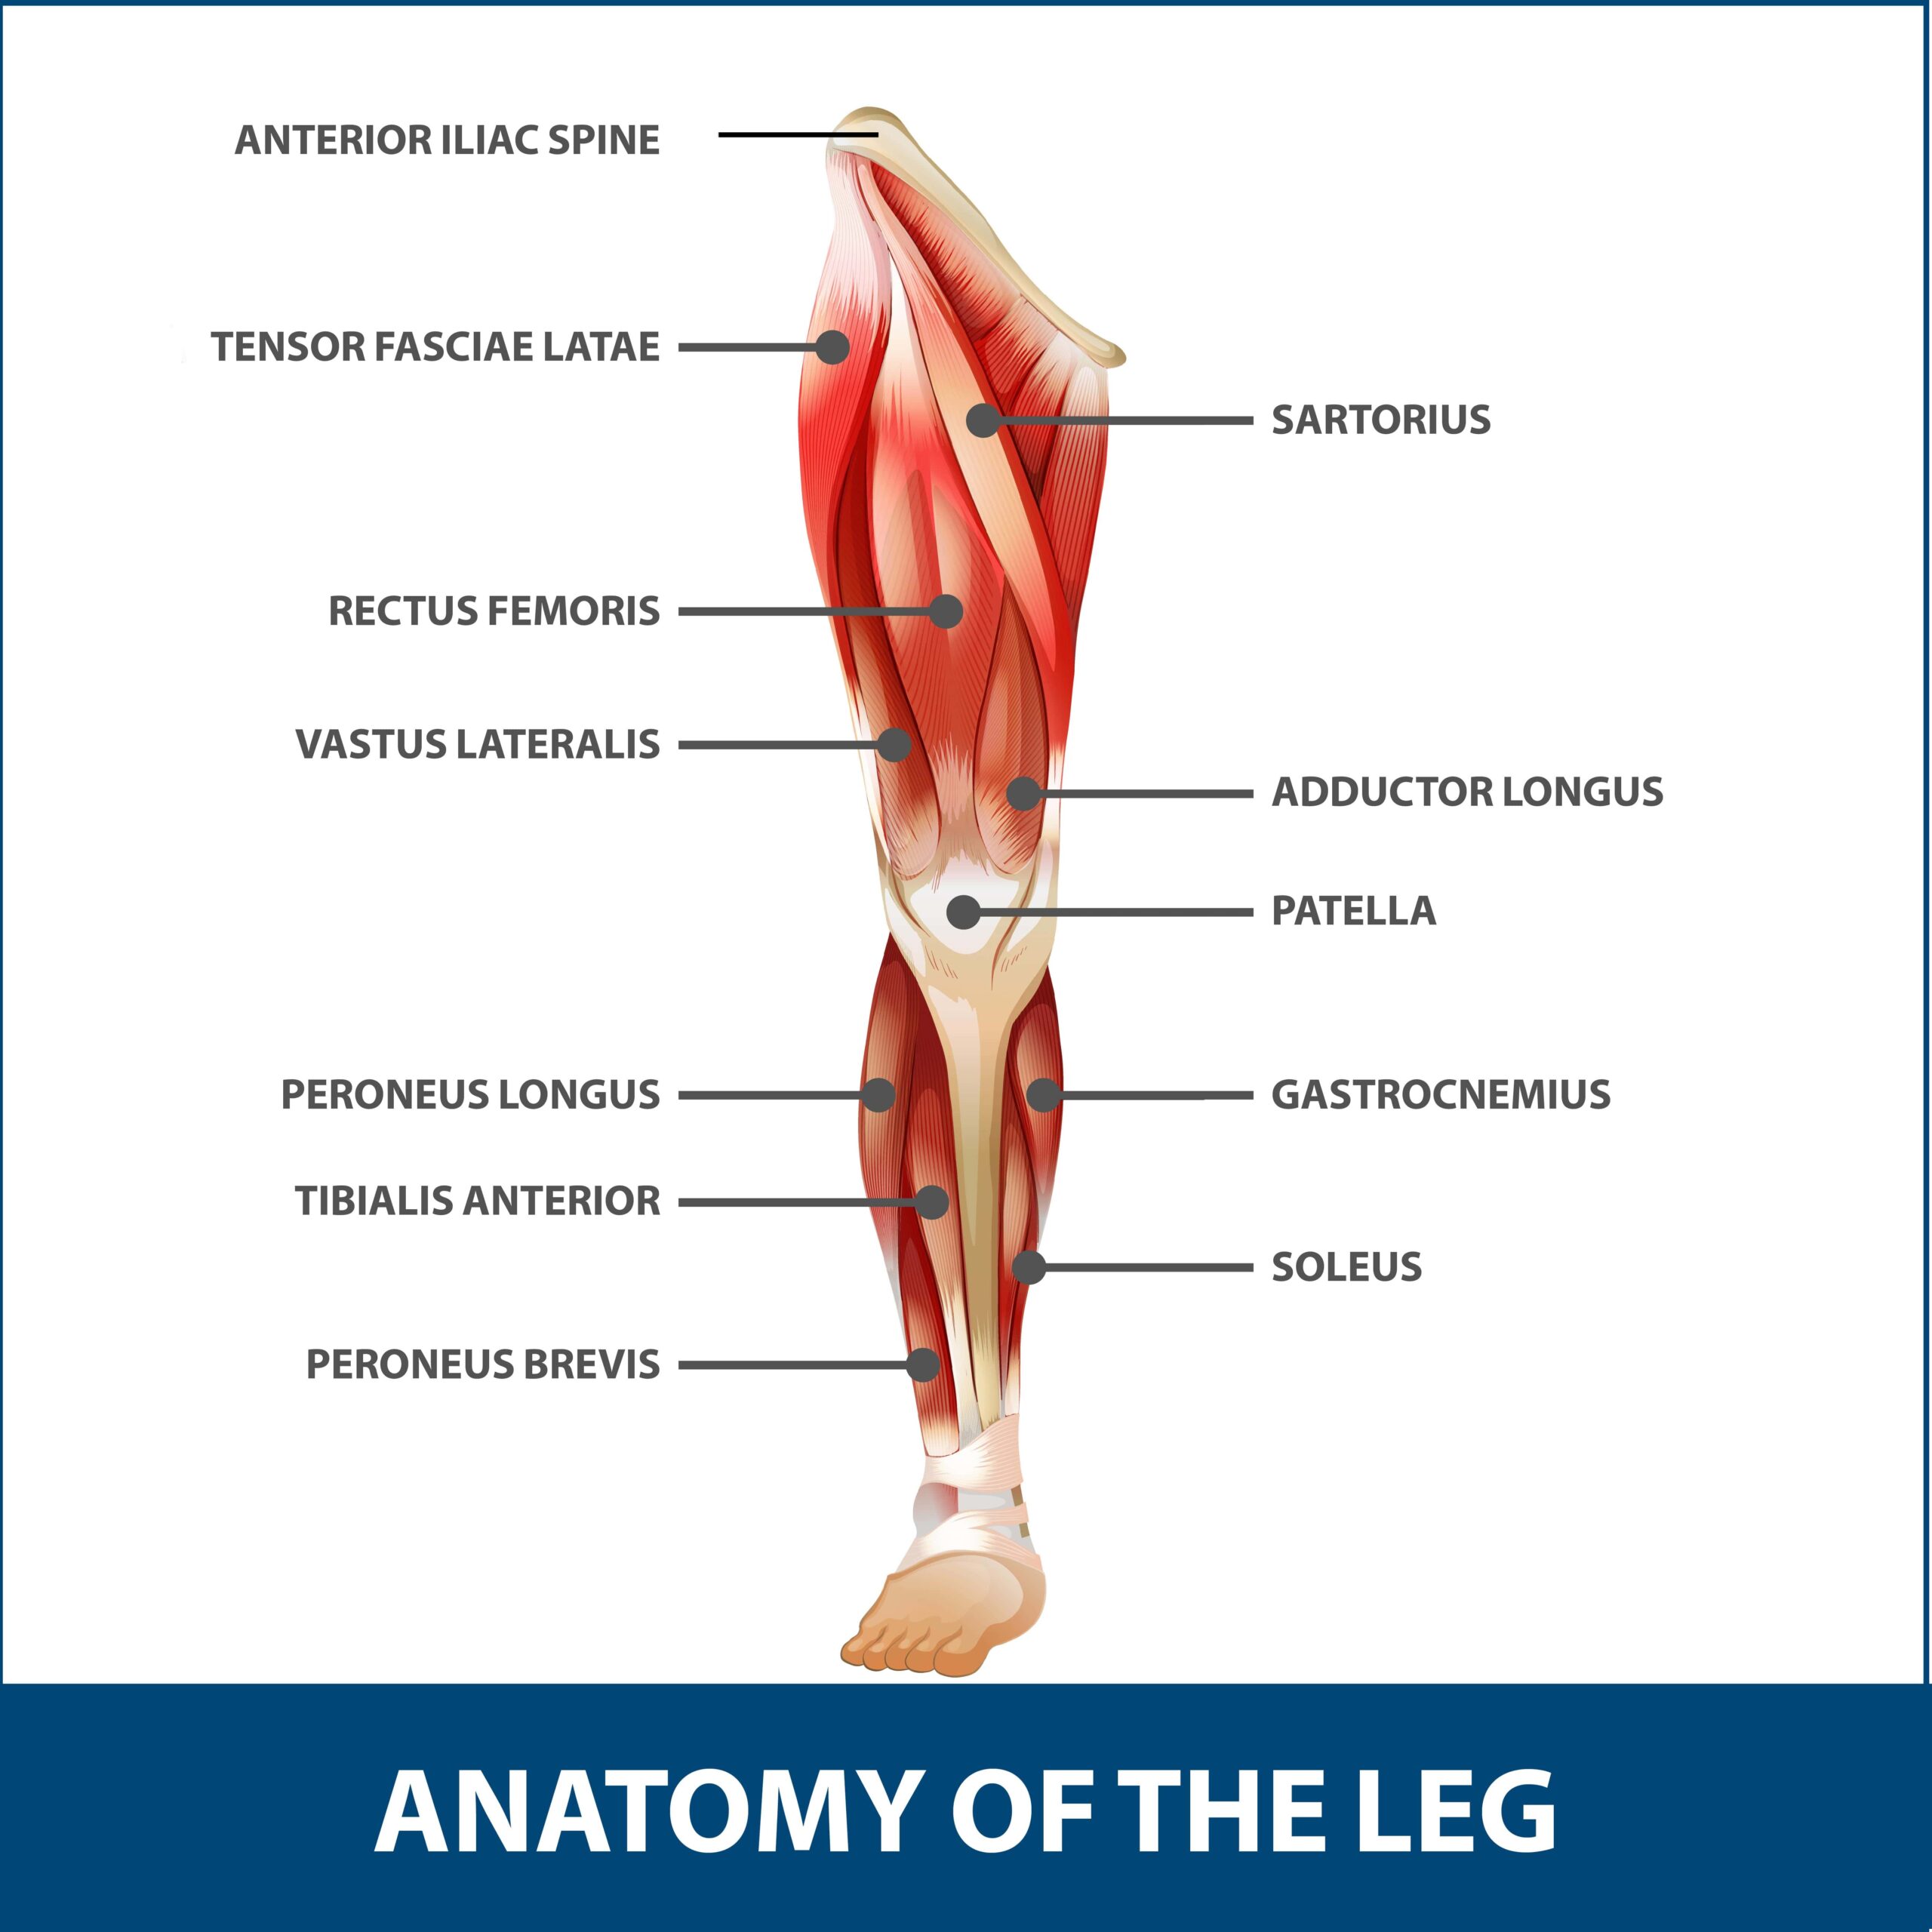 Torn Calf Muscle - Motion Health Centre